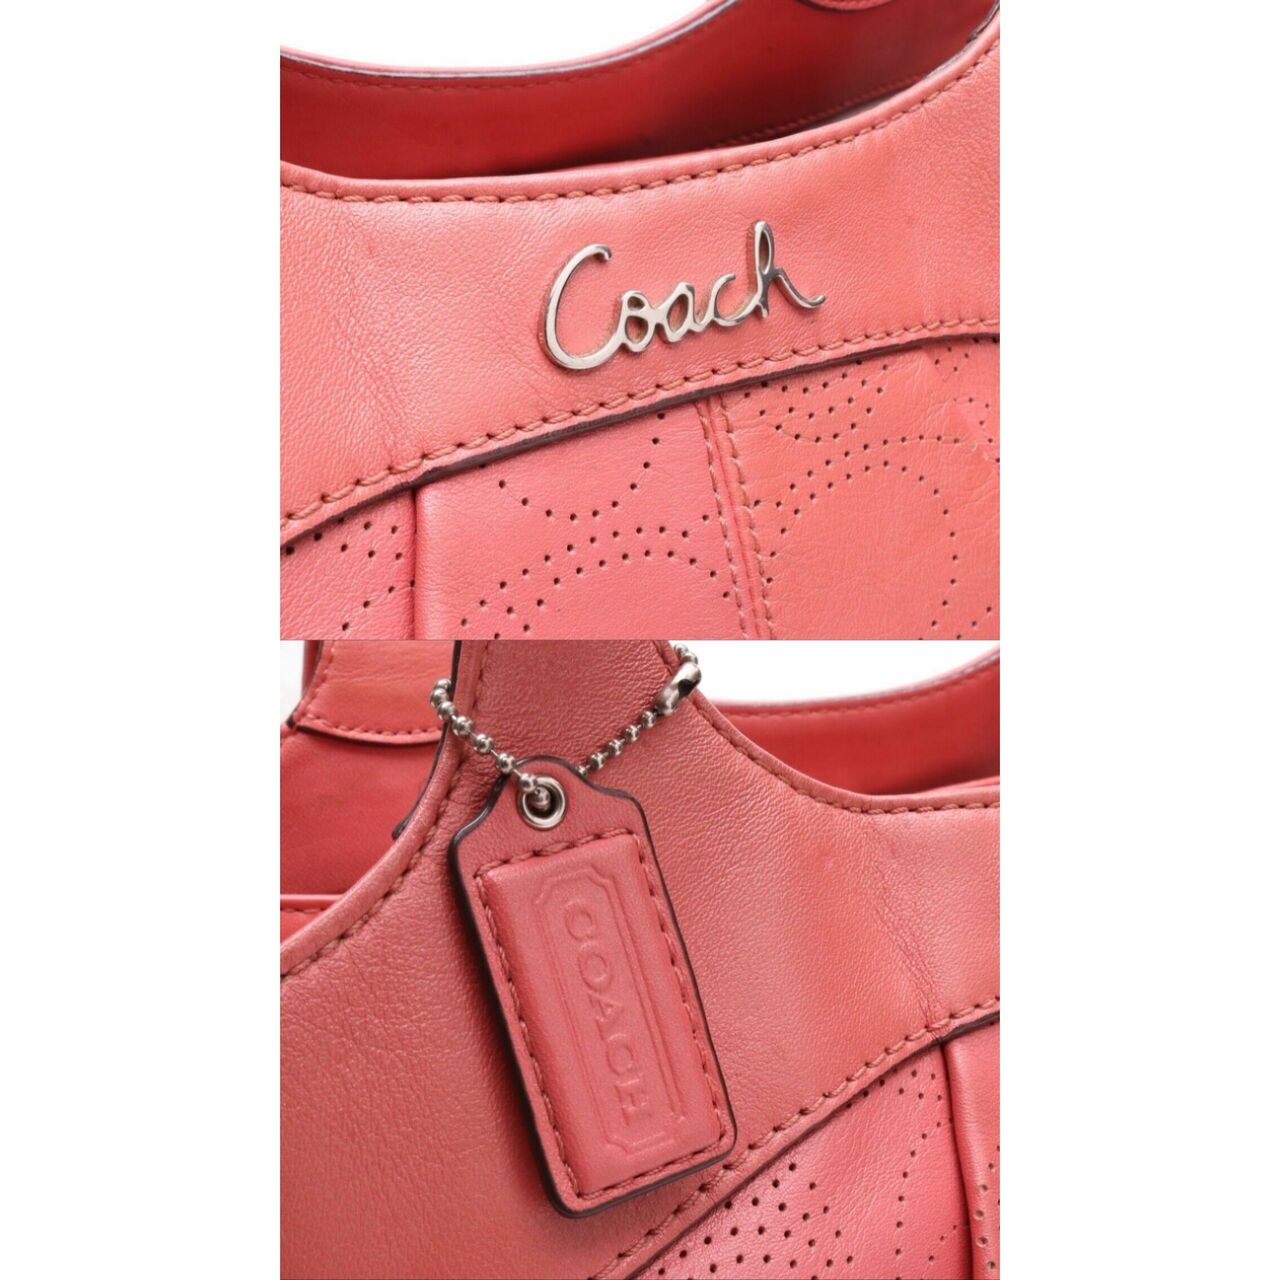 Coach Perforated Lexi Coral Shoulder Bag